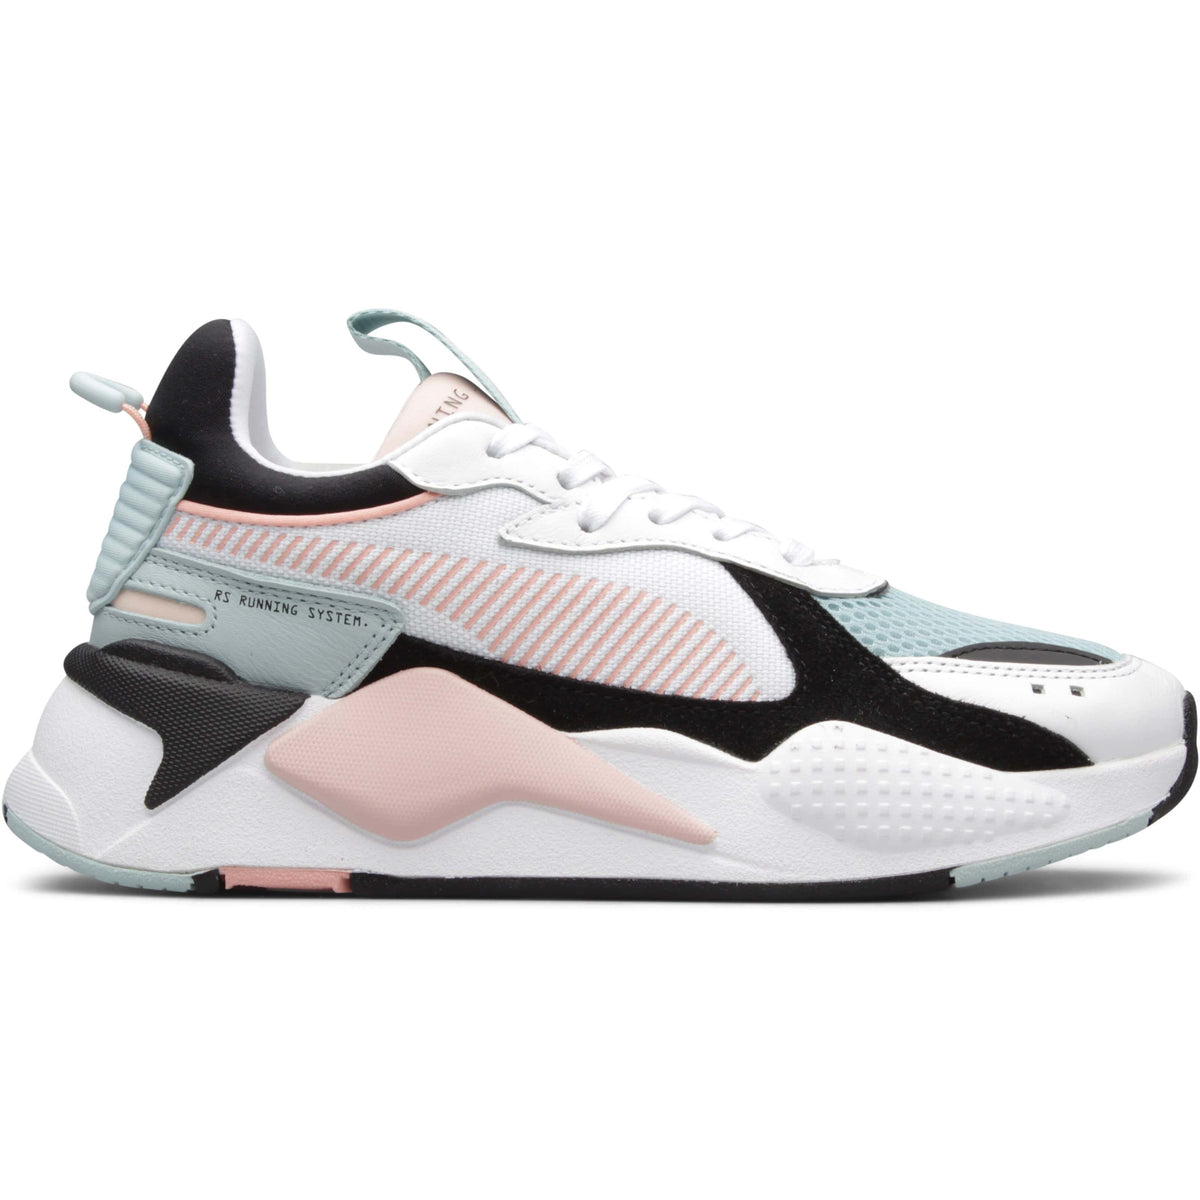 puma shoes best offers